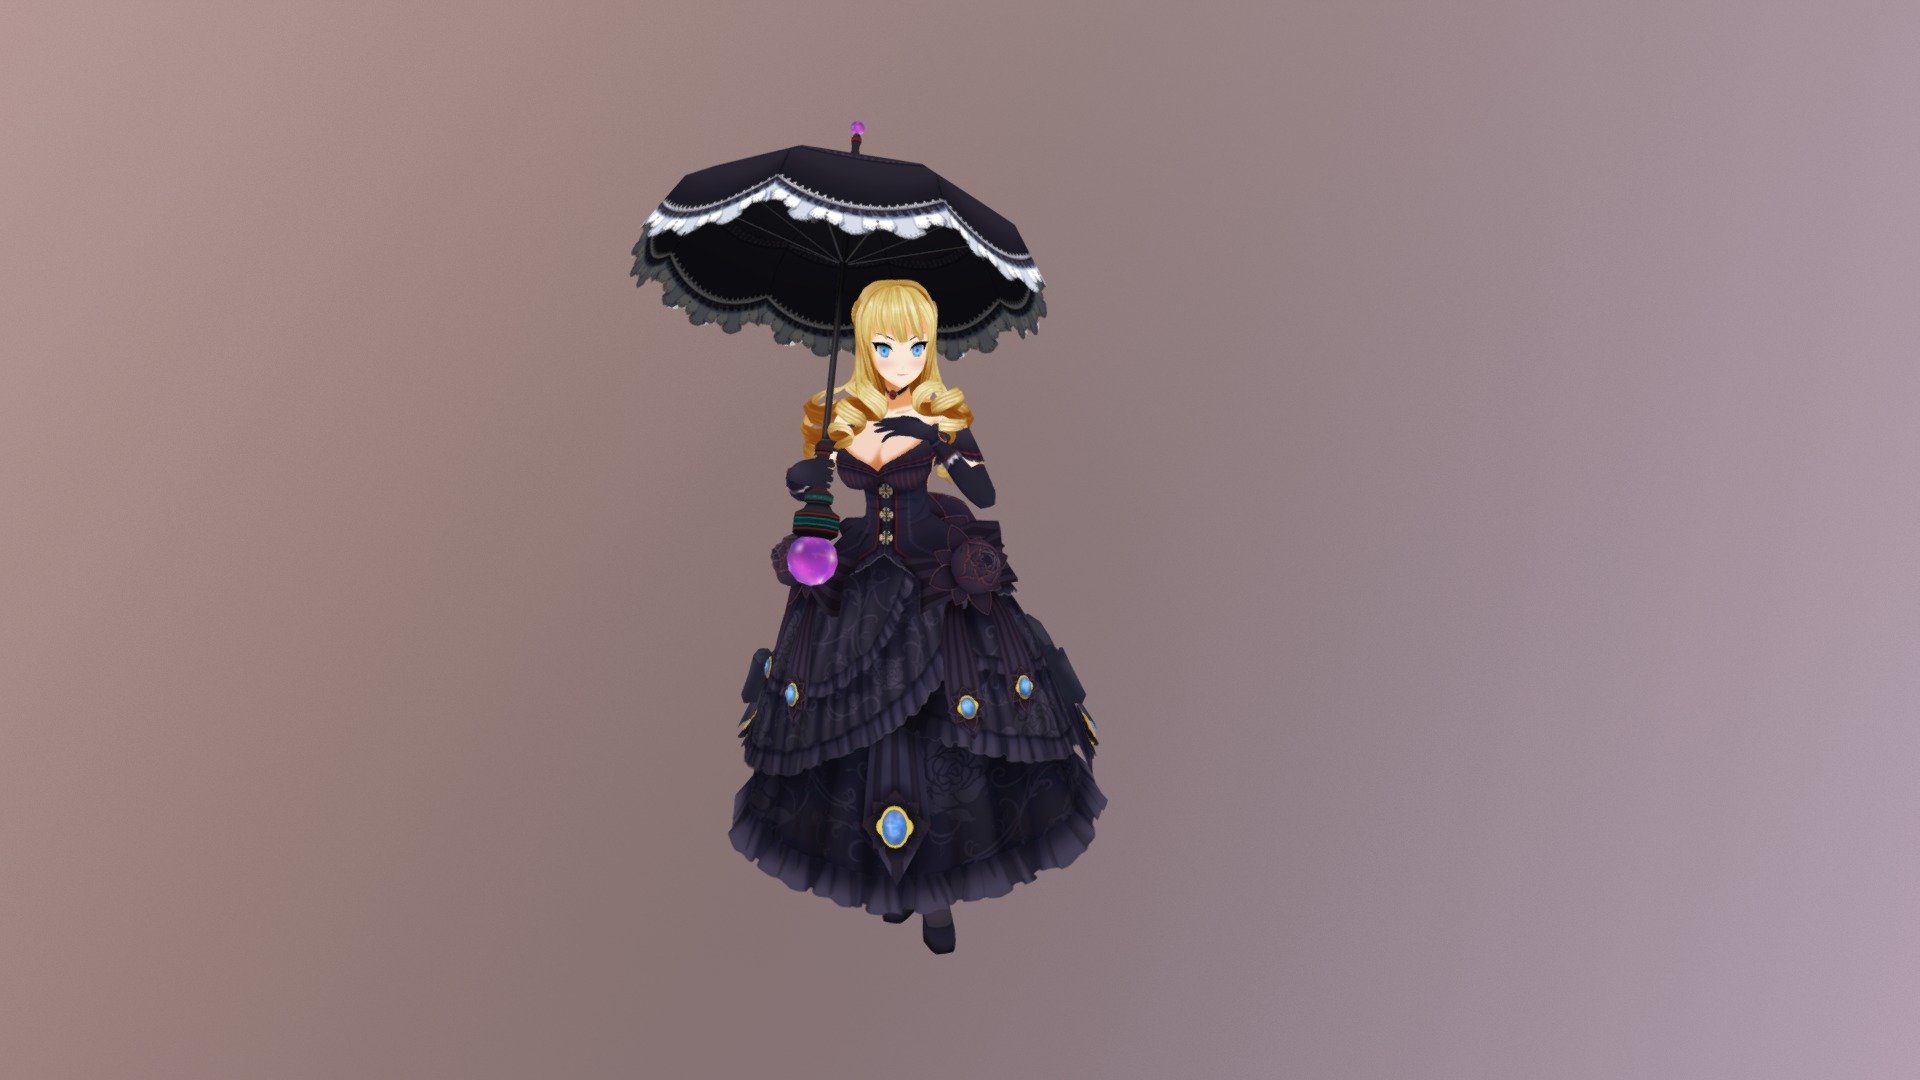 Set as witch, umbrella is a staff - Ains - 3D model by simon81403 3d model